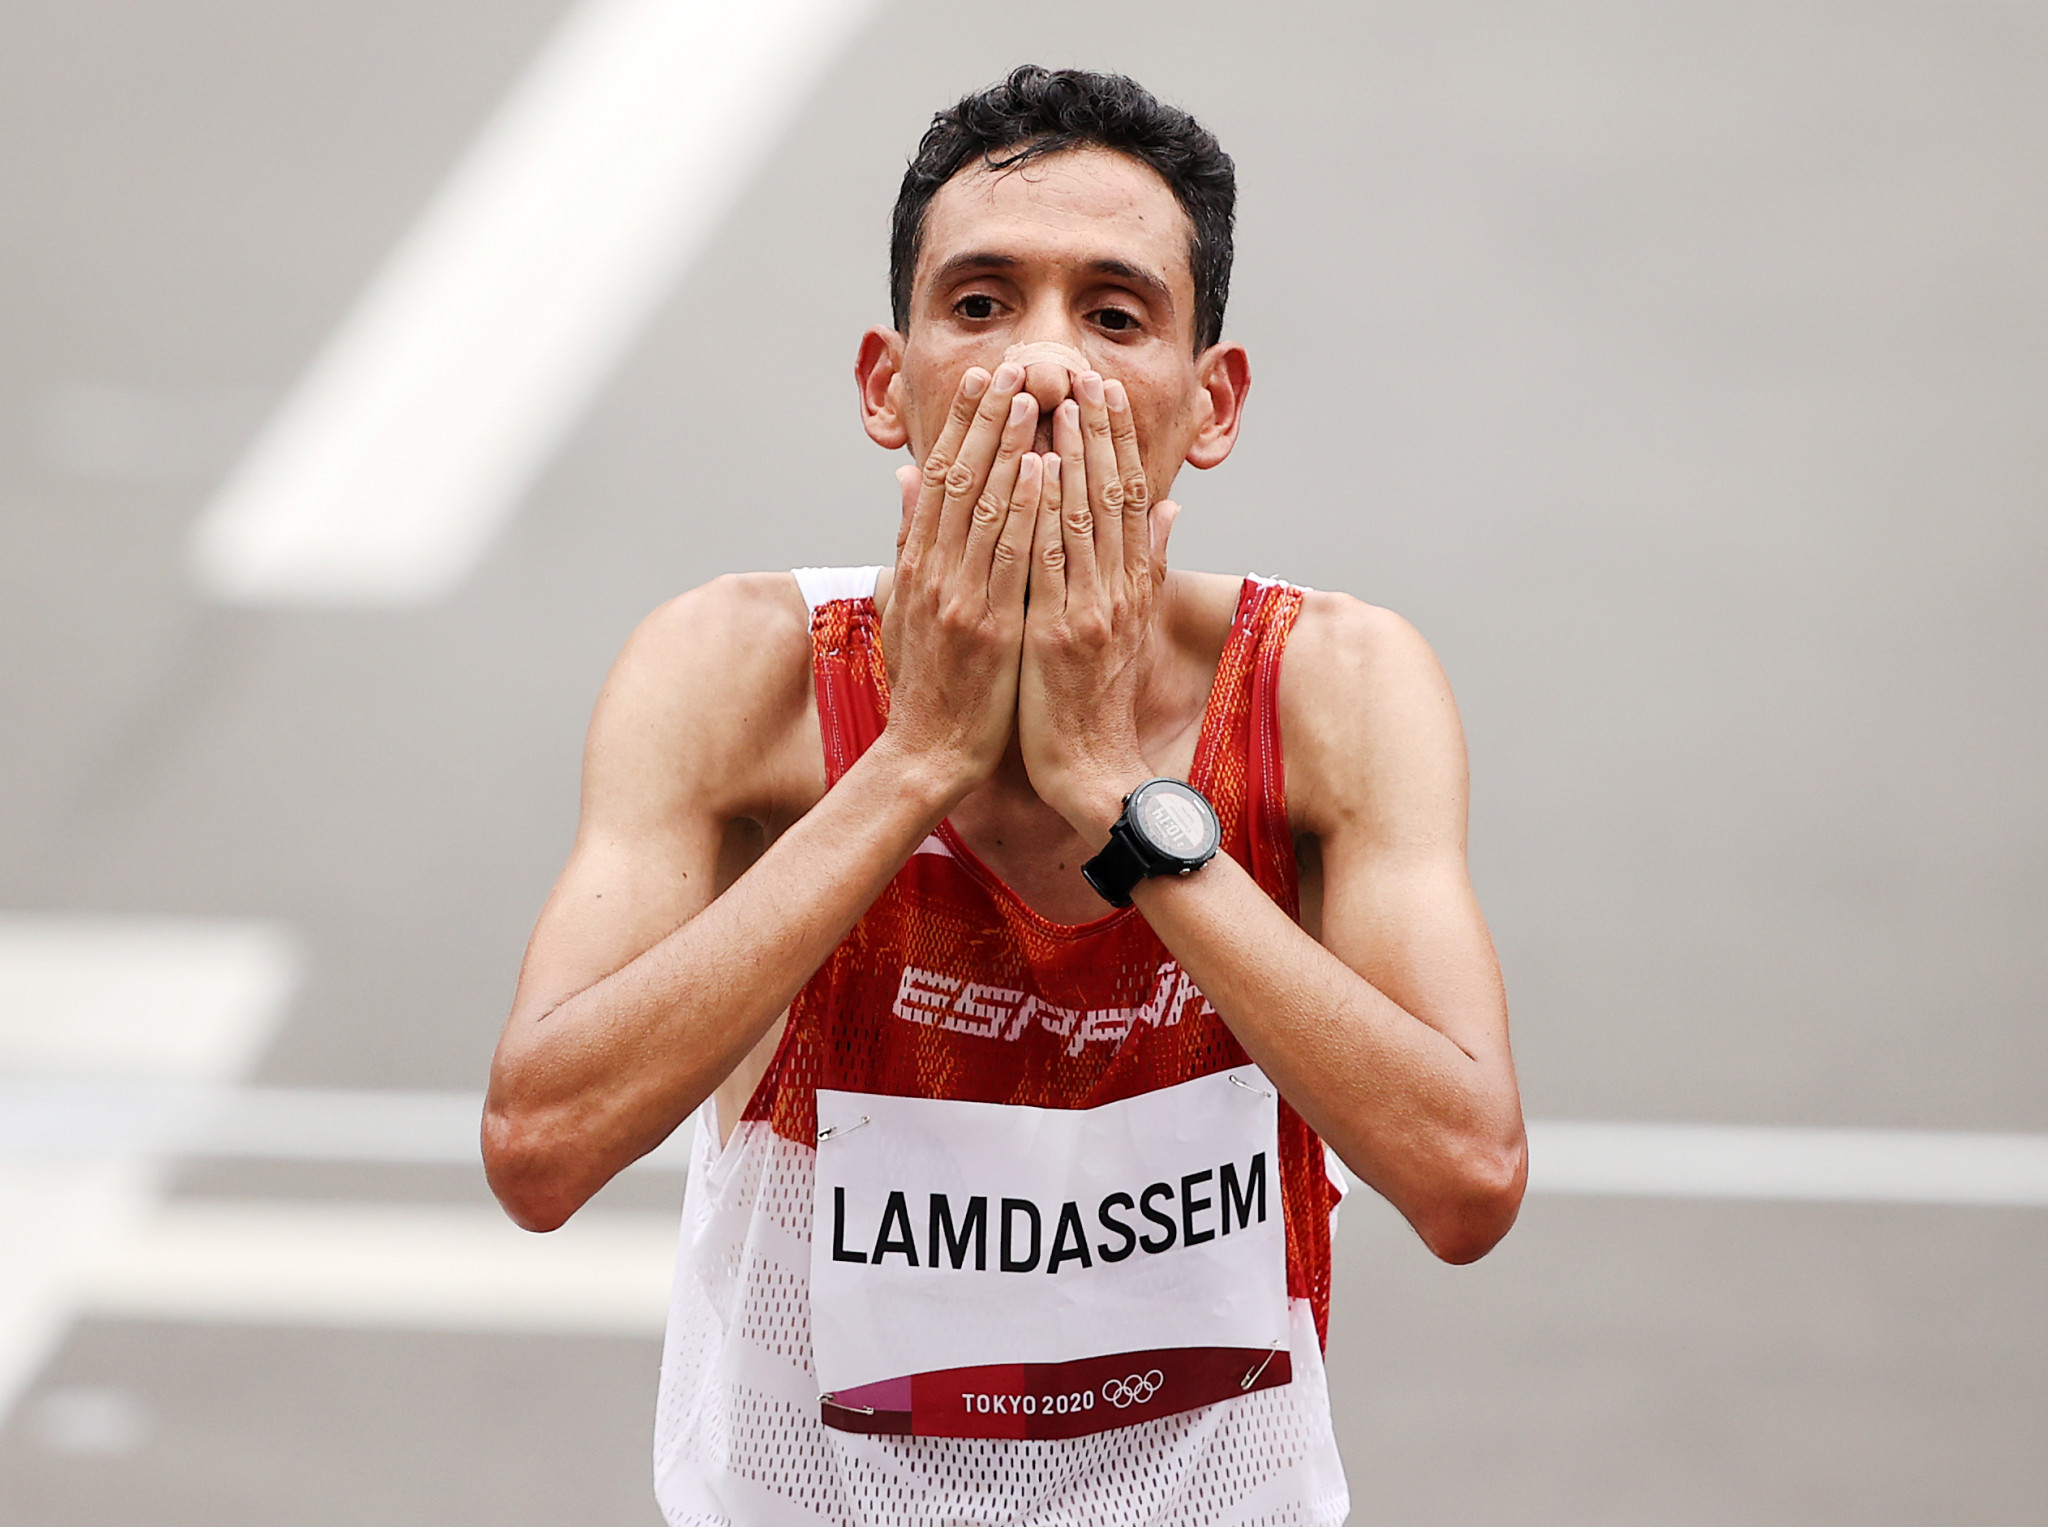 Lamdassem aiming for gold at Munich 2022 after record-breaking run